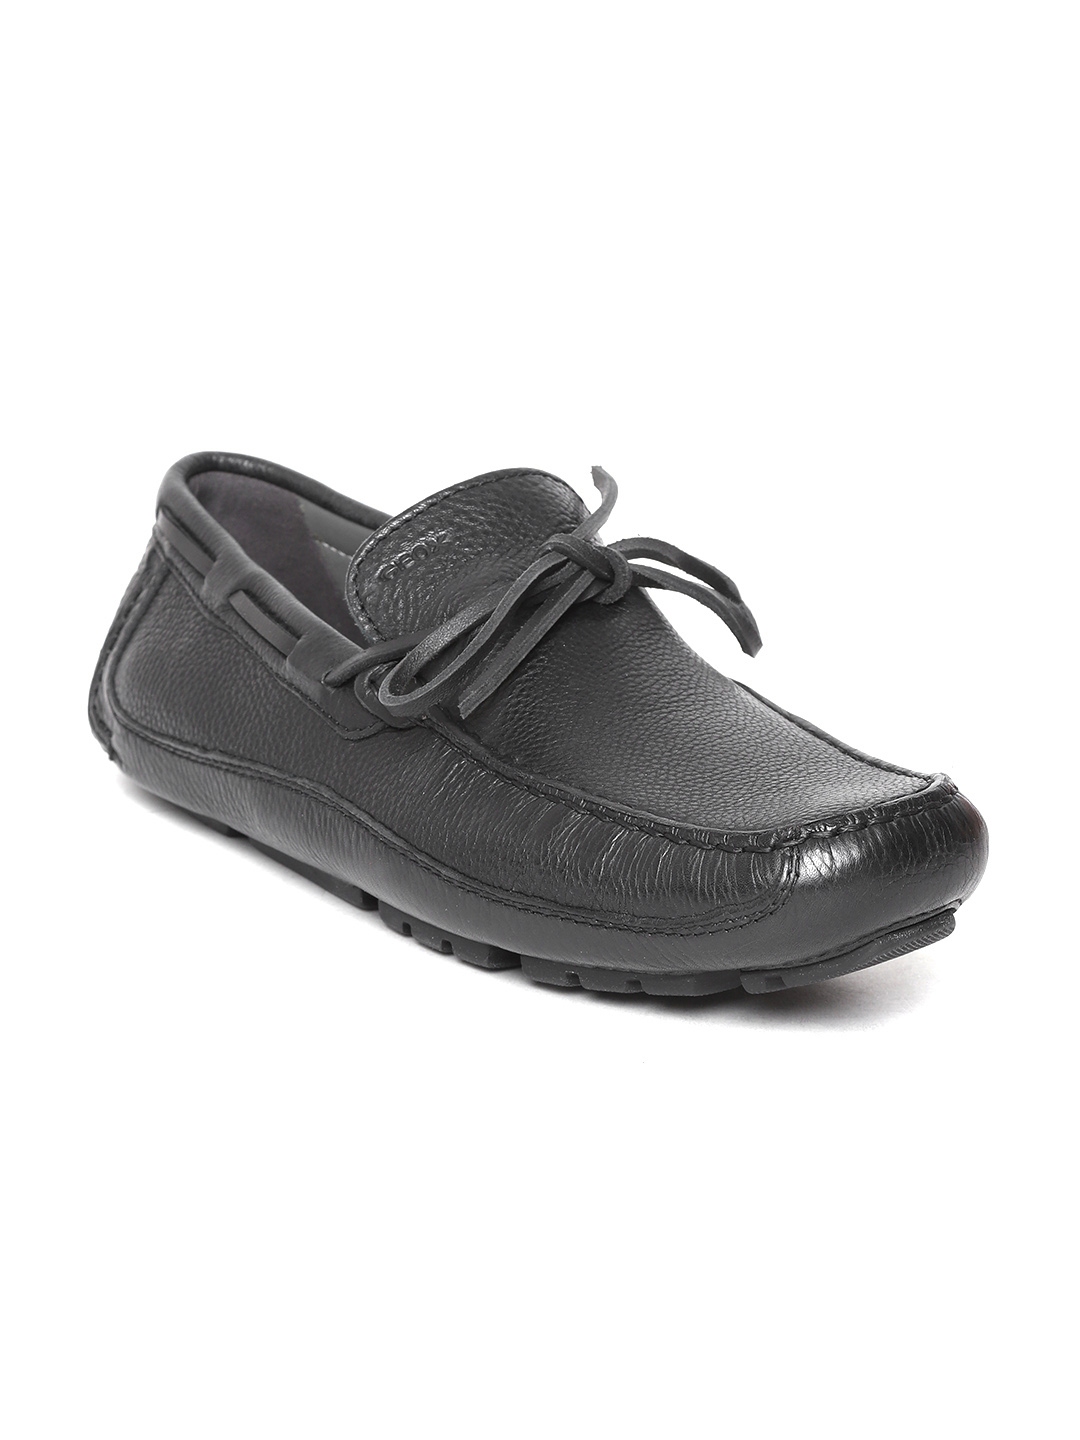 Buy Geox Men Black Leather Driving Shoes - Casual Shoes for Men ...